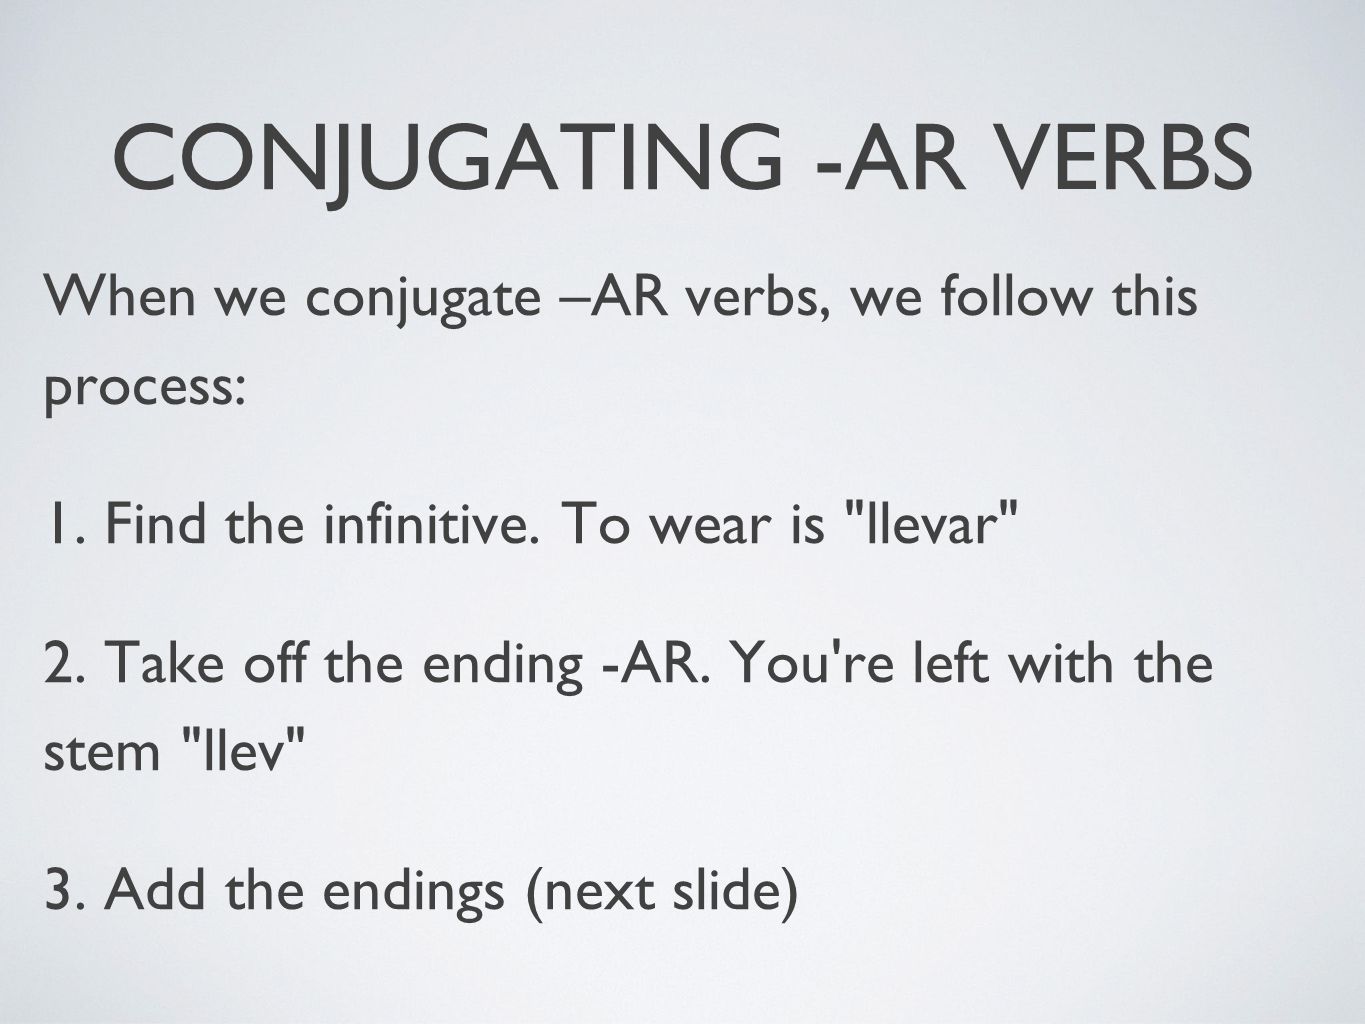 CONJUGATING -AR VERBS When we conjugate –AR verbs, we follow this process: 1. Find the infinitive. To wear is llevar